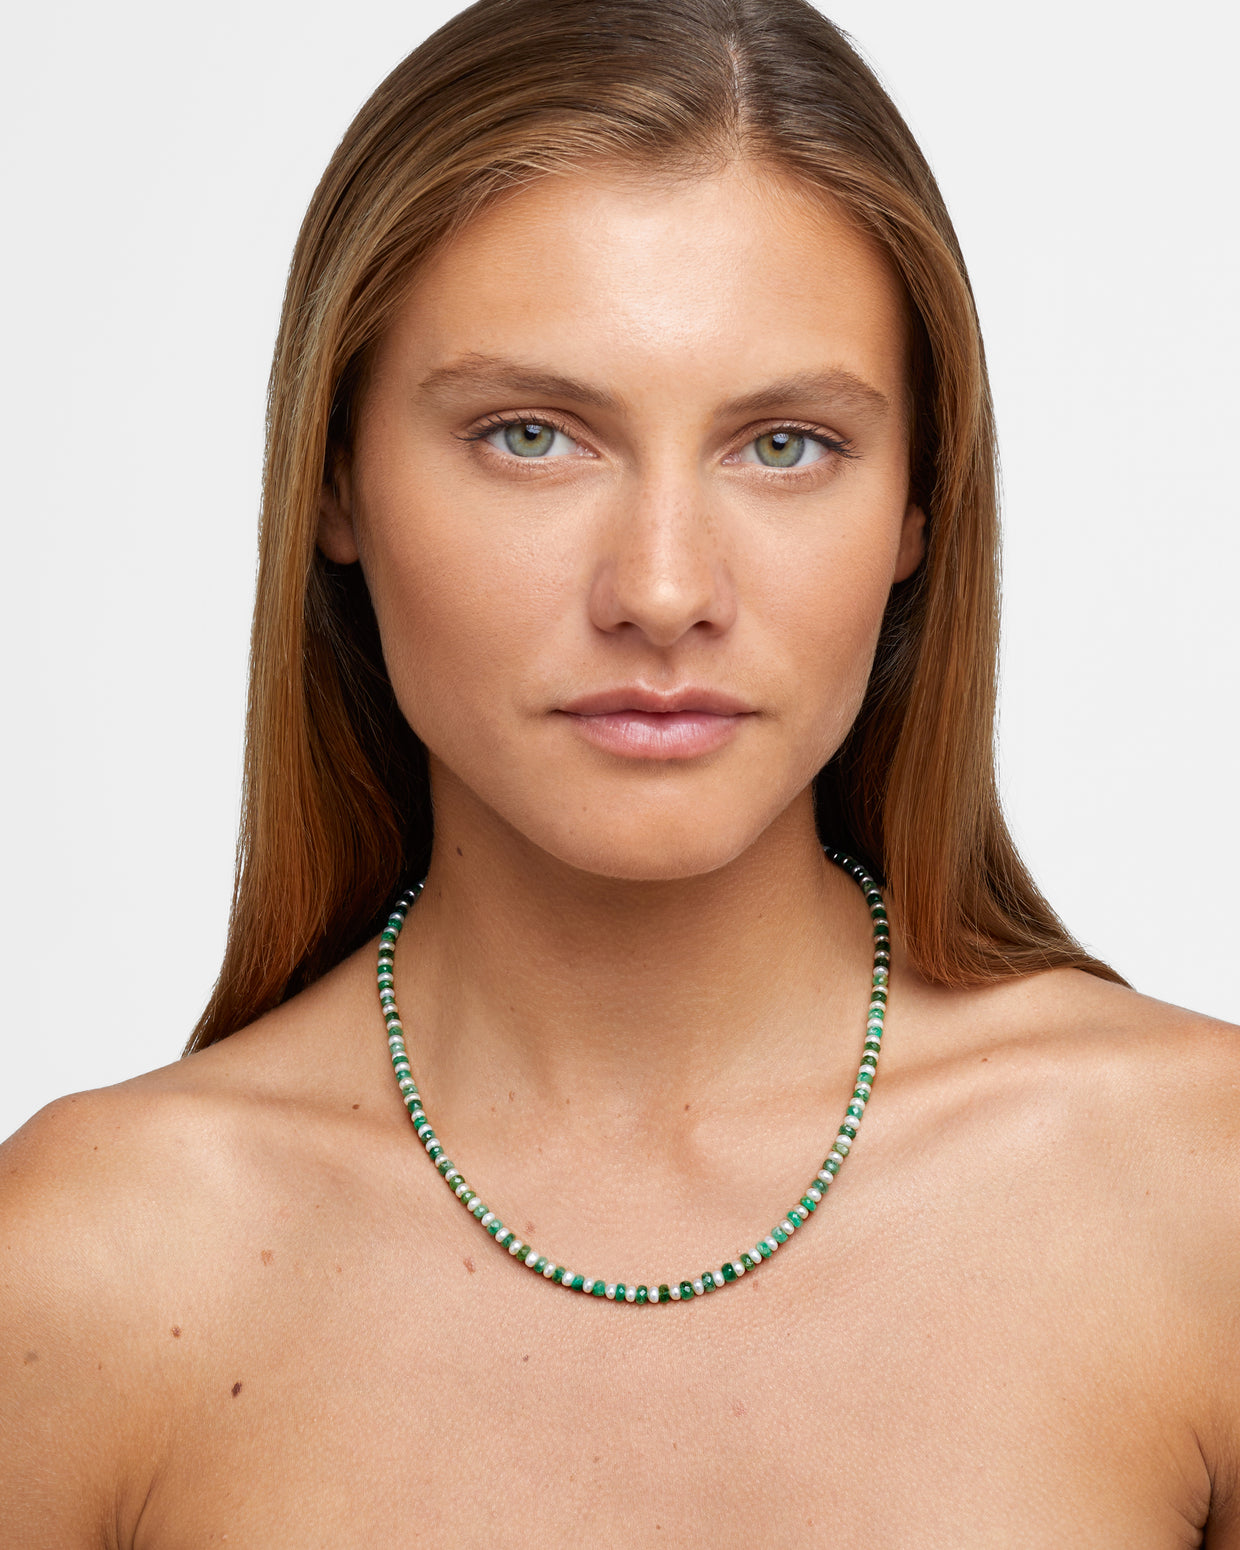 Ocean Connection Emerald & Pearl Necklace